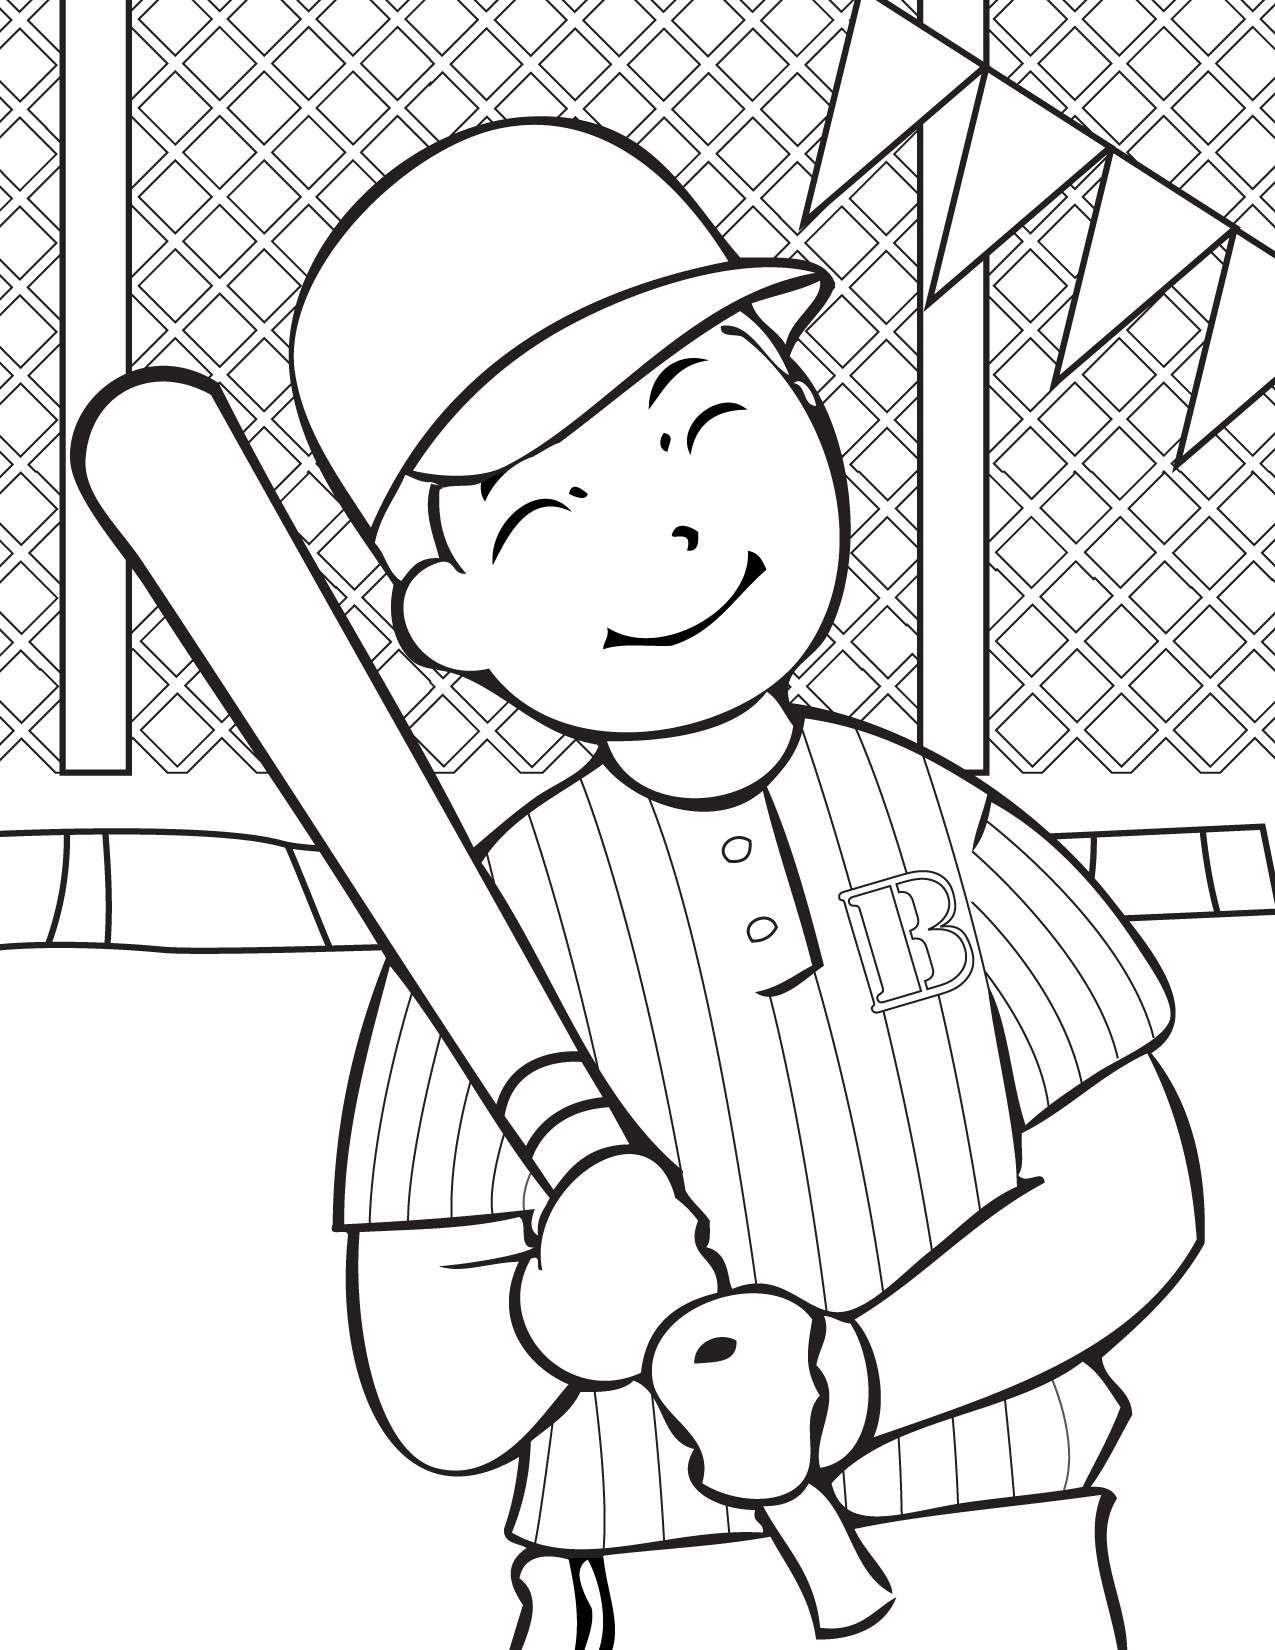 Printable Coloring Pages For Boys
 Free Printable Baseball Coloring Pages for Kids Best